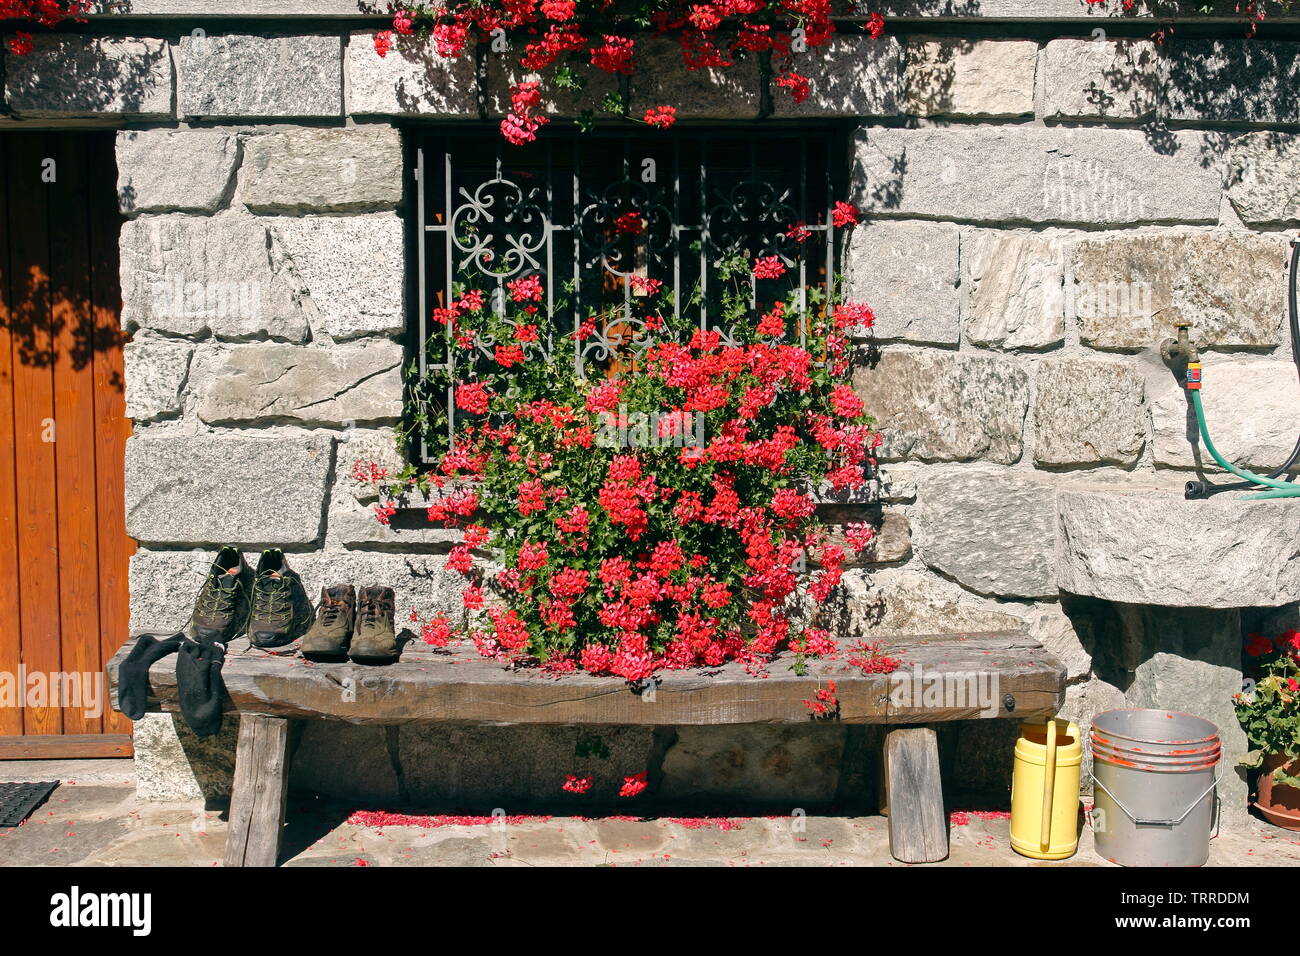 Italy Piedmont lakes area Lago d' Giulio Italian Alps Valsesia Valley Piode traditional stone buildings with red flowers geraniums architecture garden Stock Photo